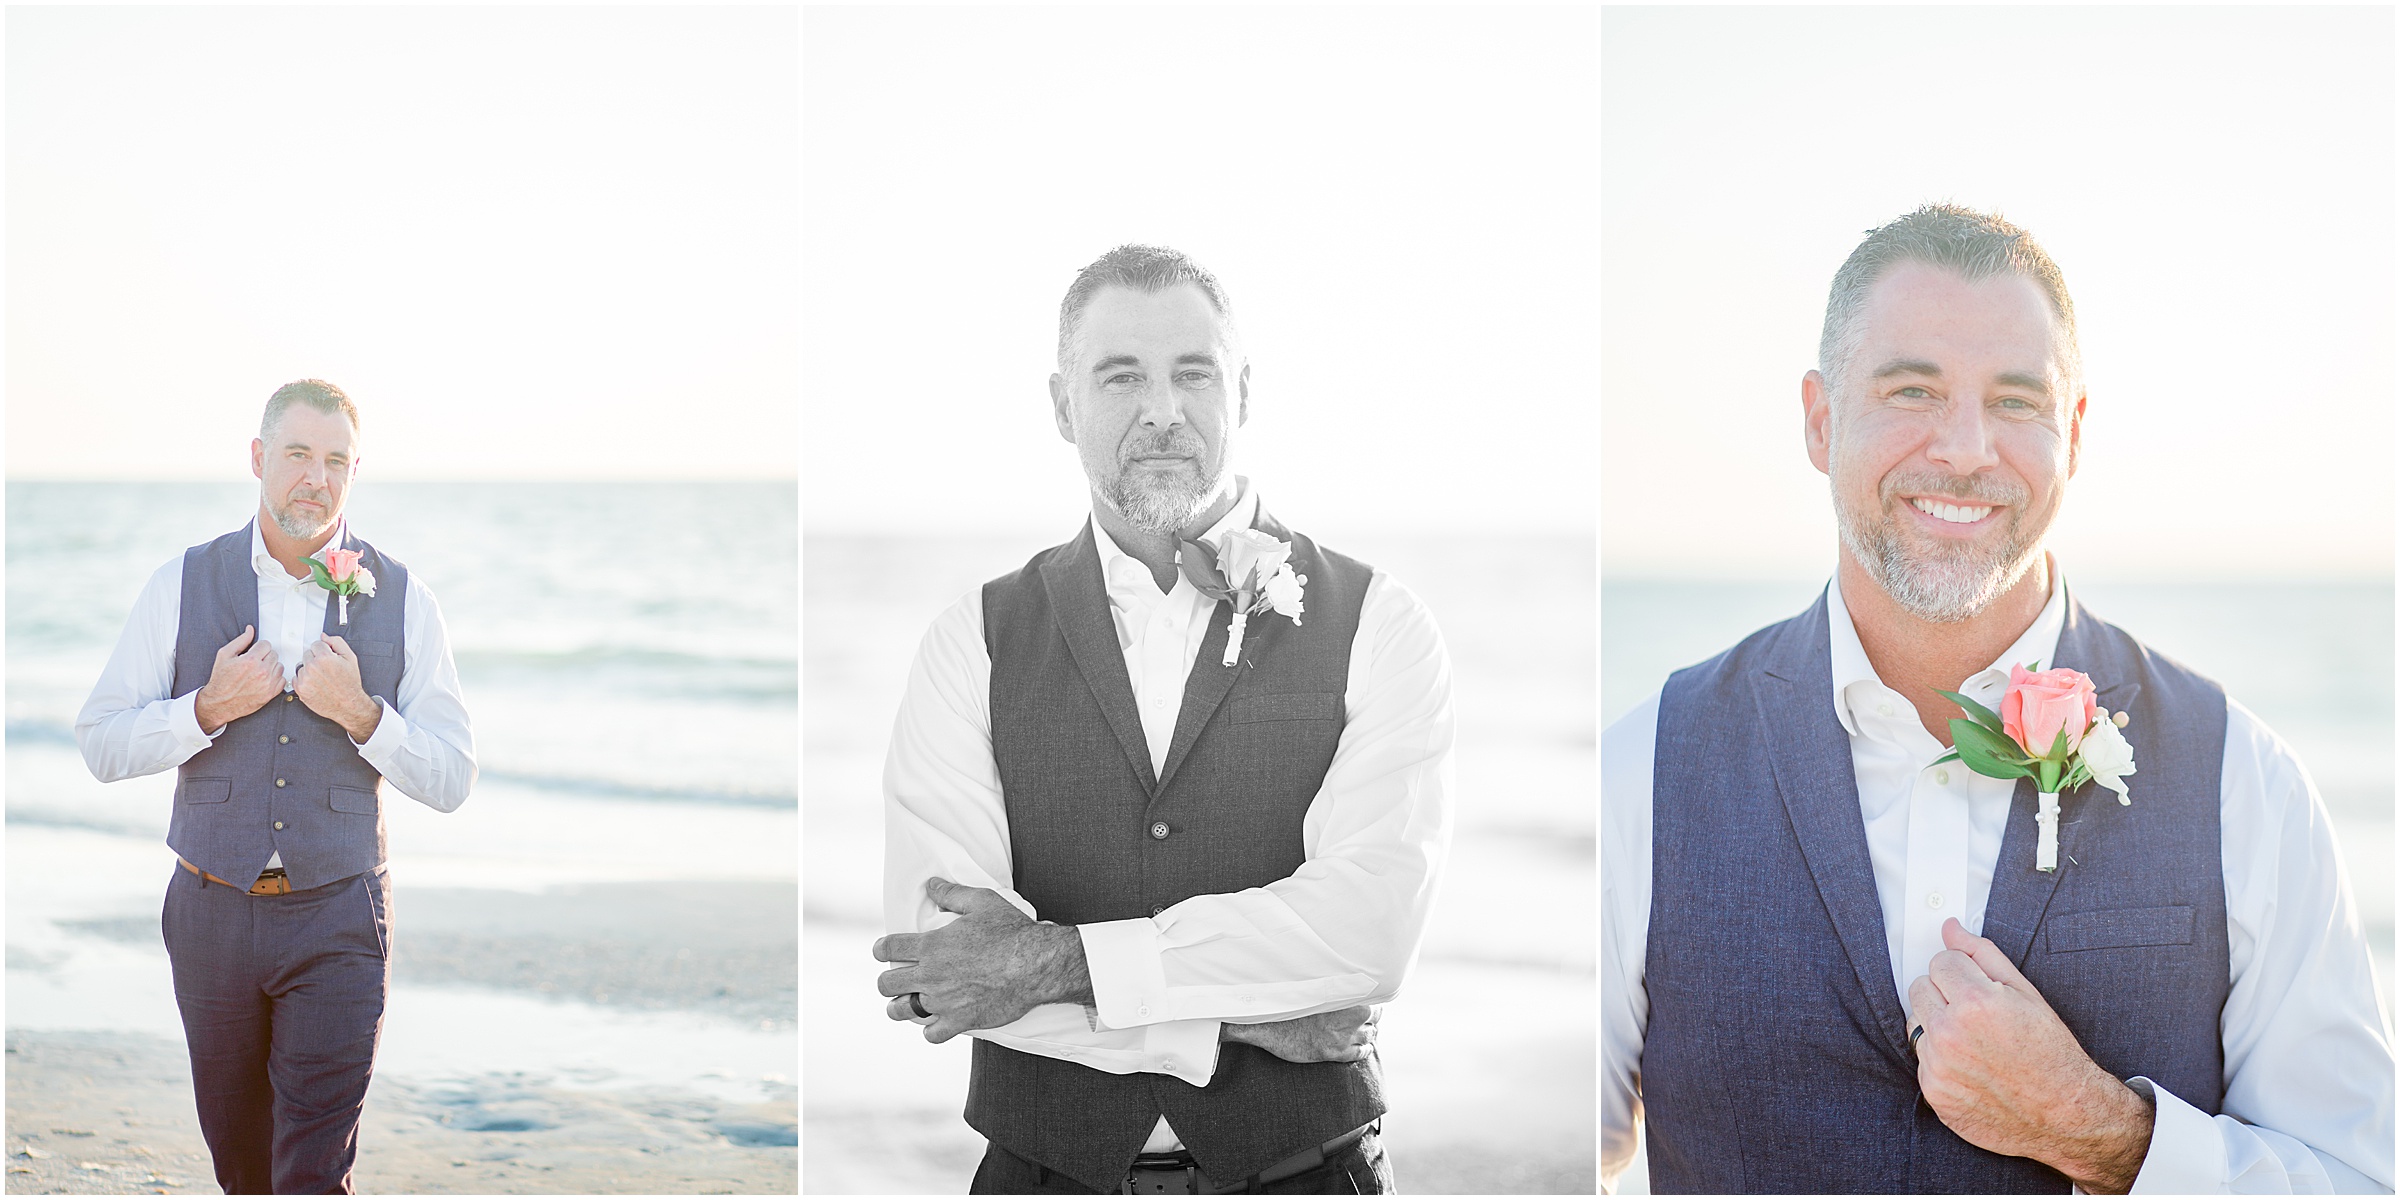 Paige & Chris Chance get married at their intimate beach elopement on Indian Rocks Beach Florida.